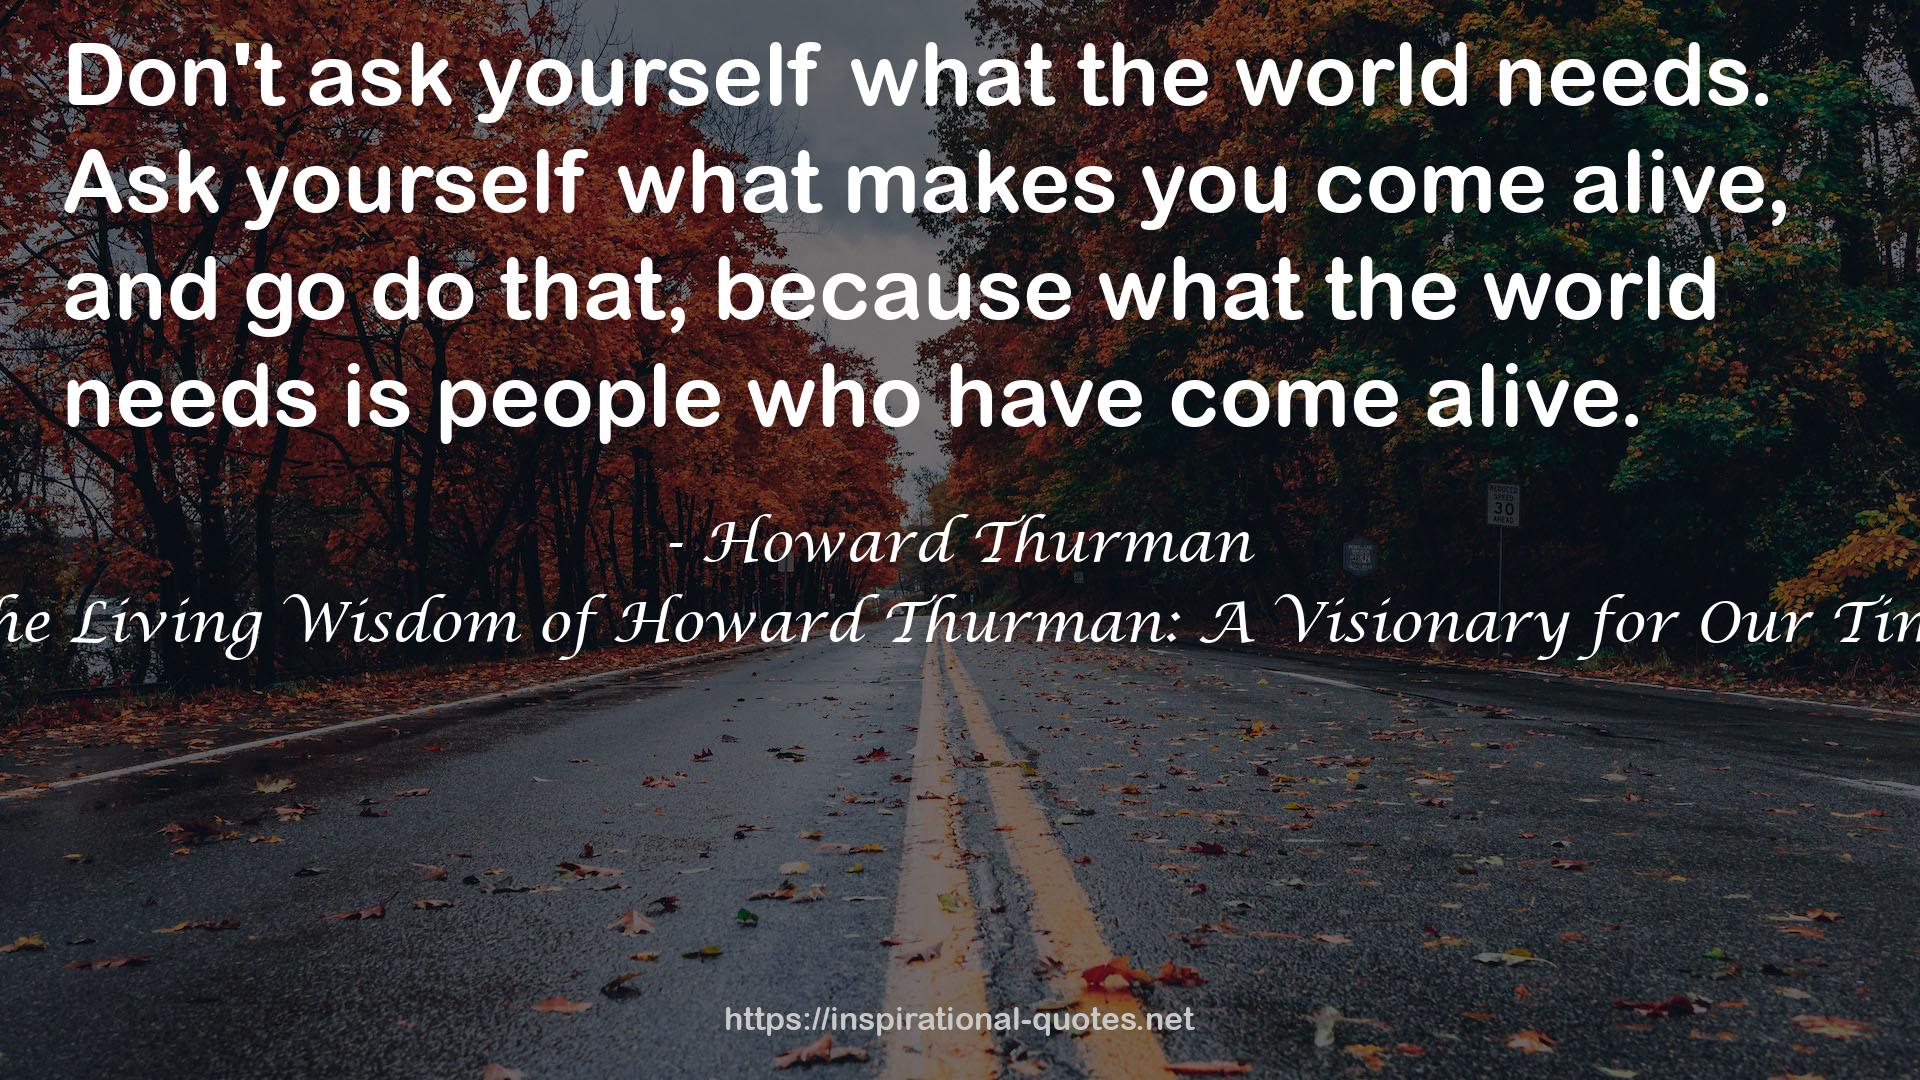 The Living Wisdom of Howard Thurman: A Visionary for Our Time QUOTES